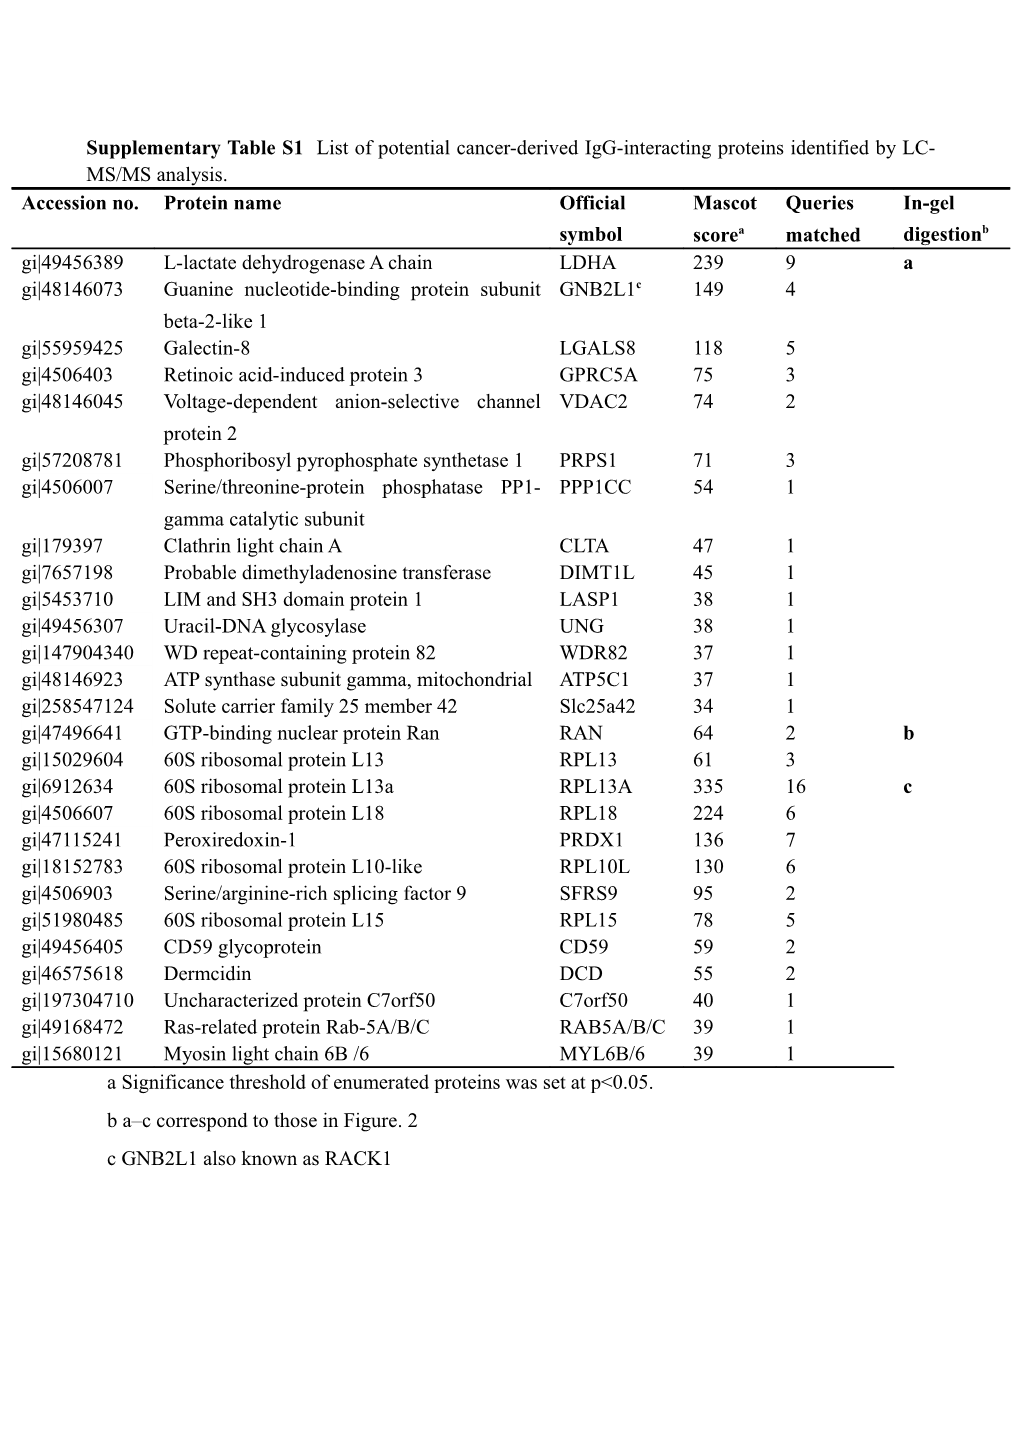 Supplementary Table 1 List of Potential Cancer-Derived Igg-Interacting Proteins Identified